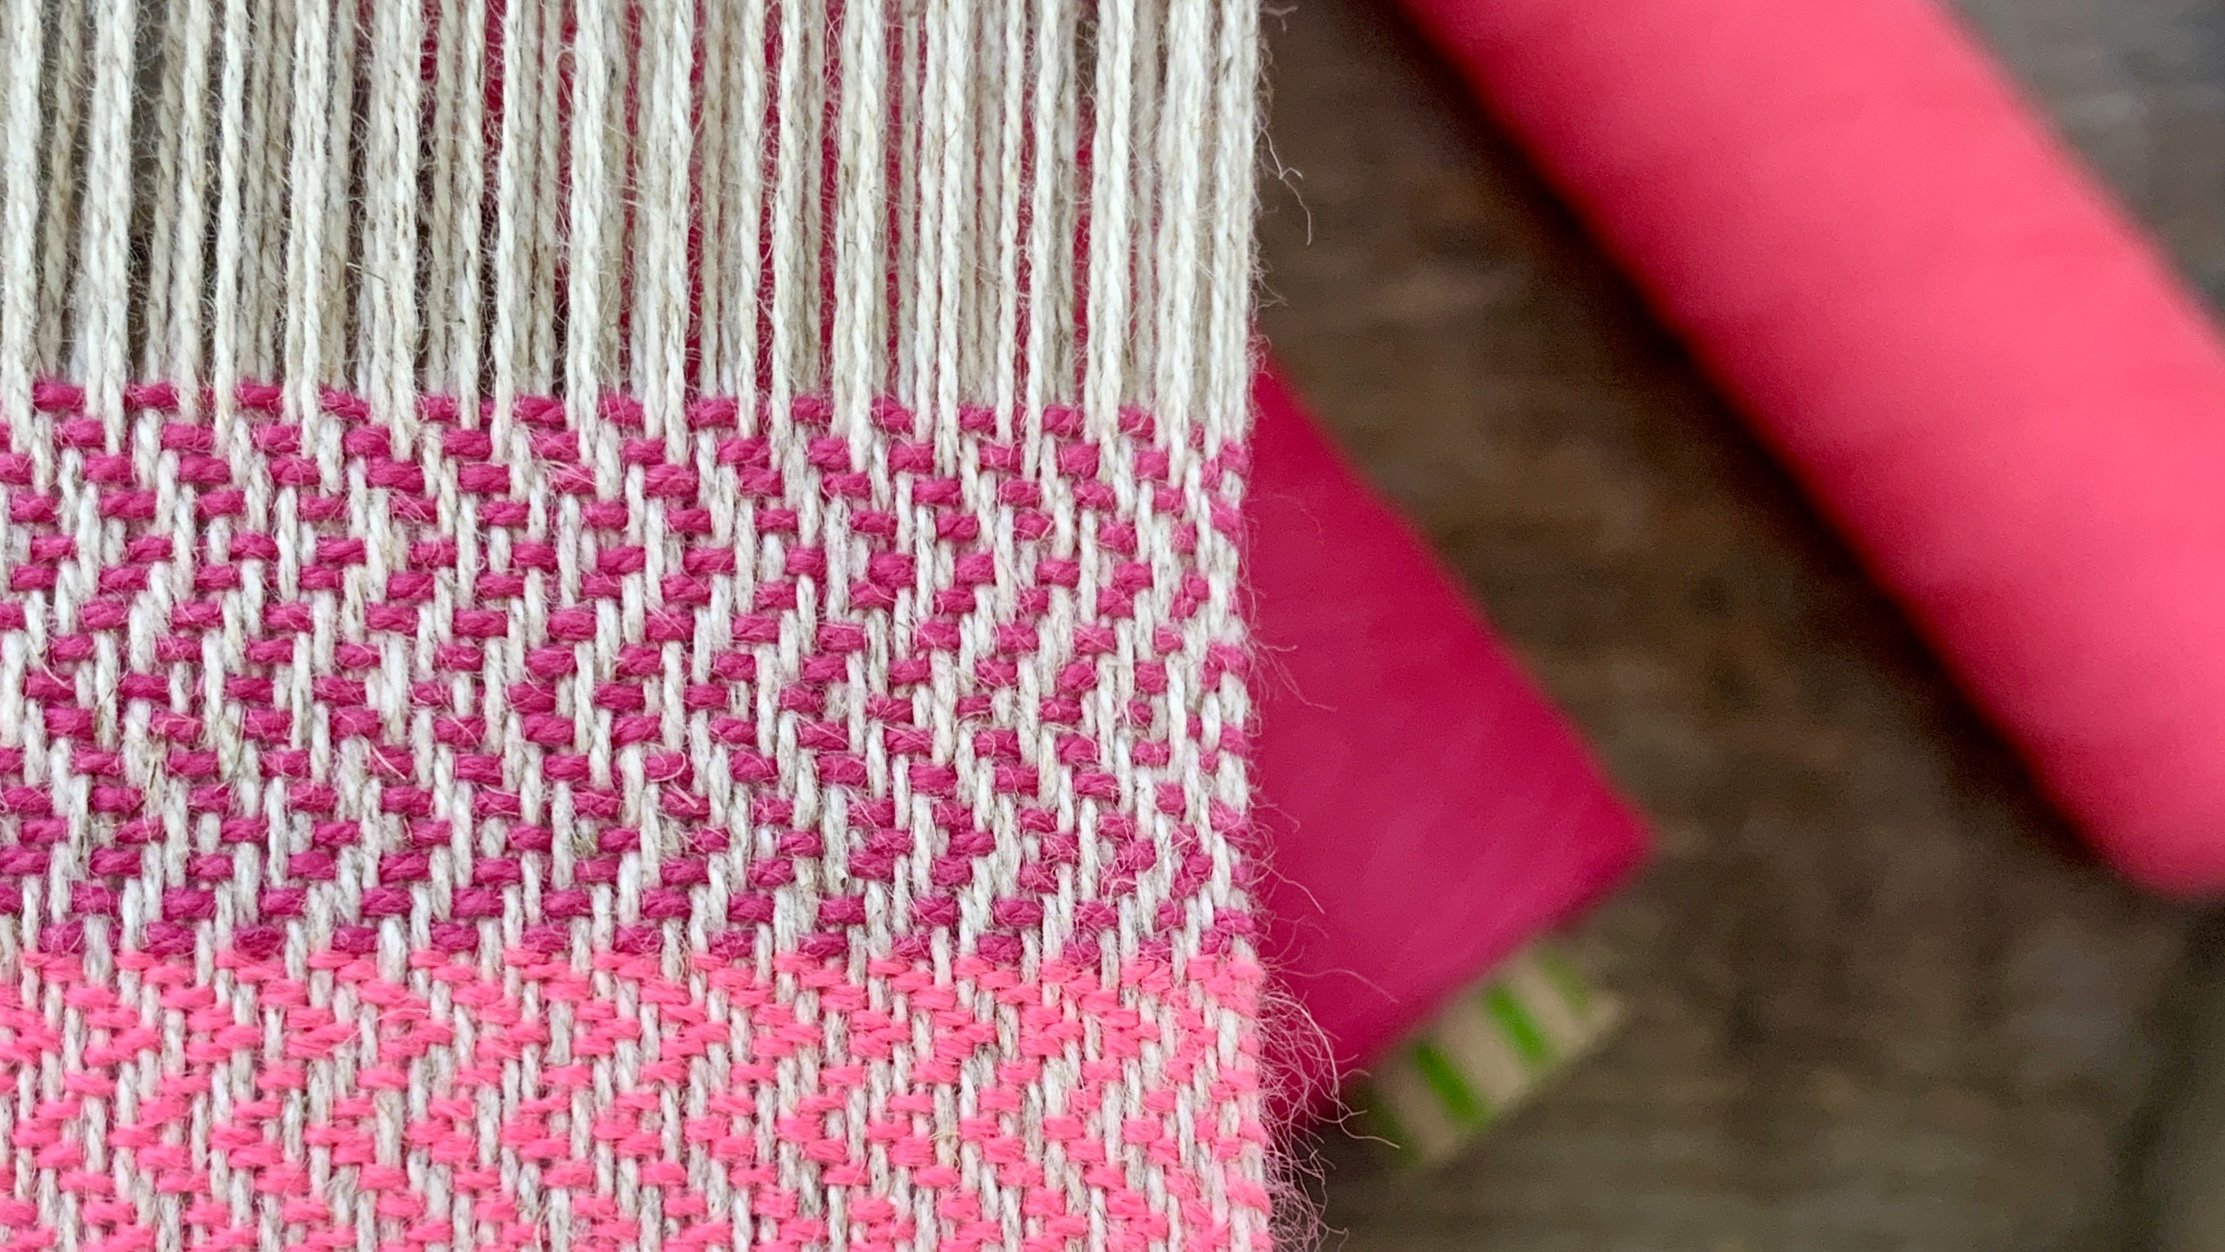 Introduction to Table Loom Weaving - Two Day Workshop